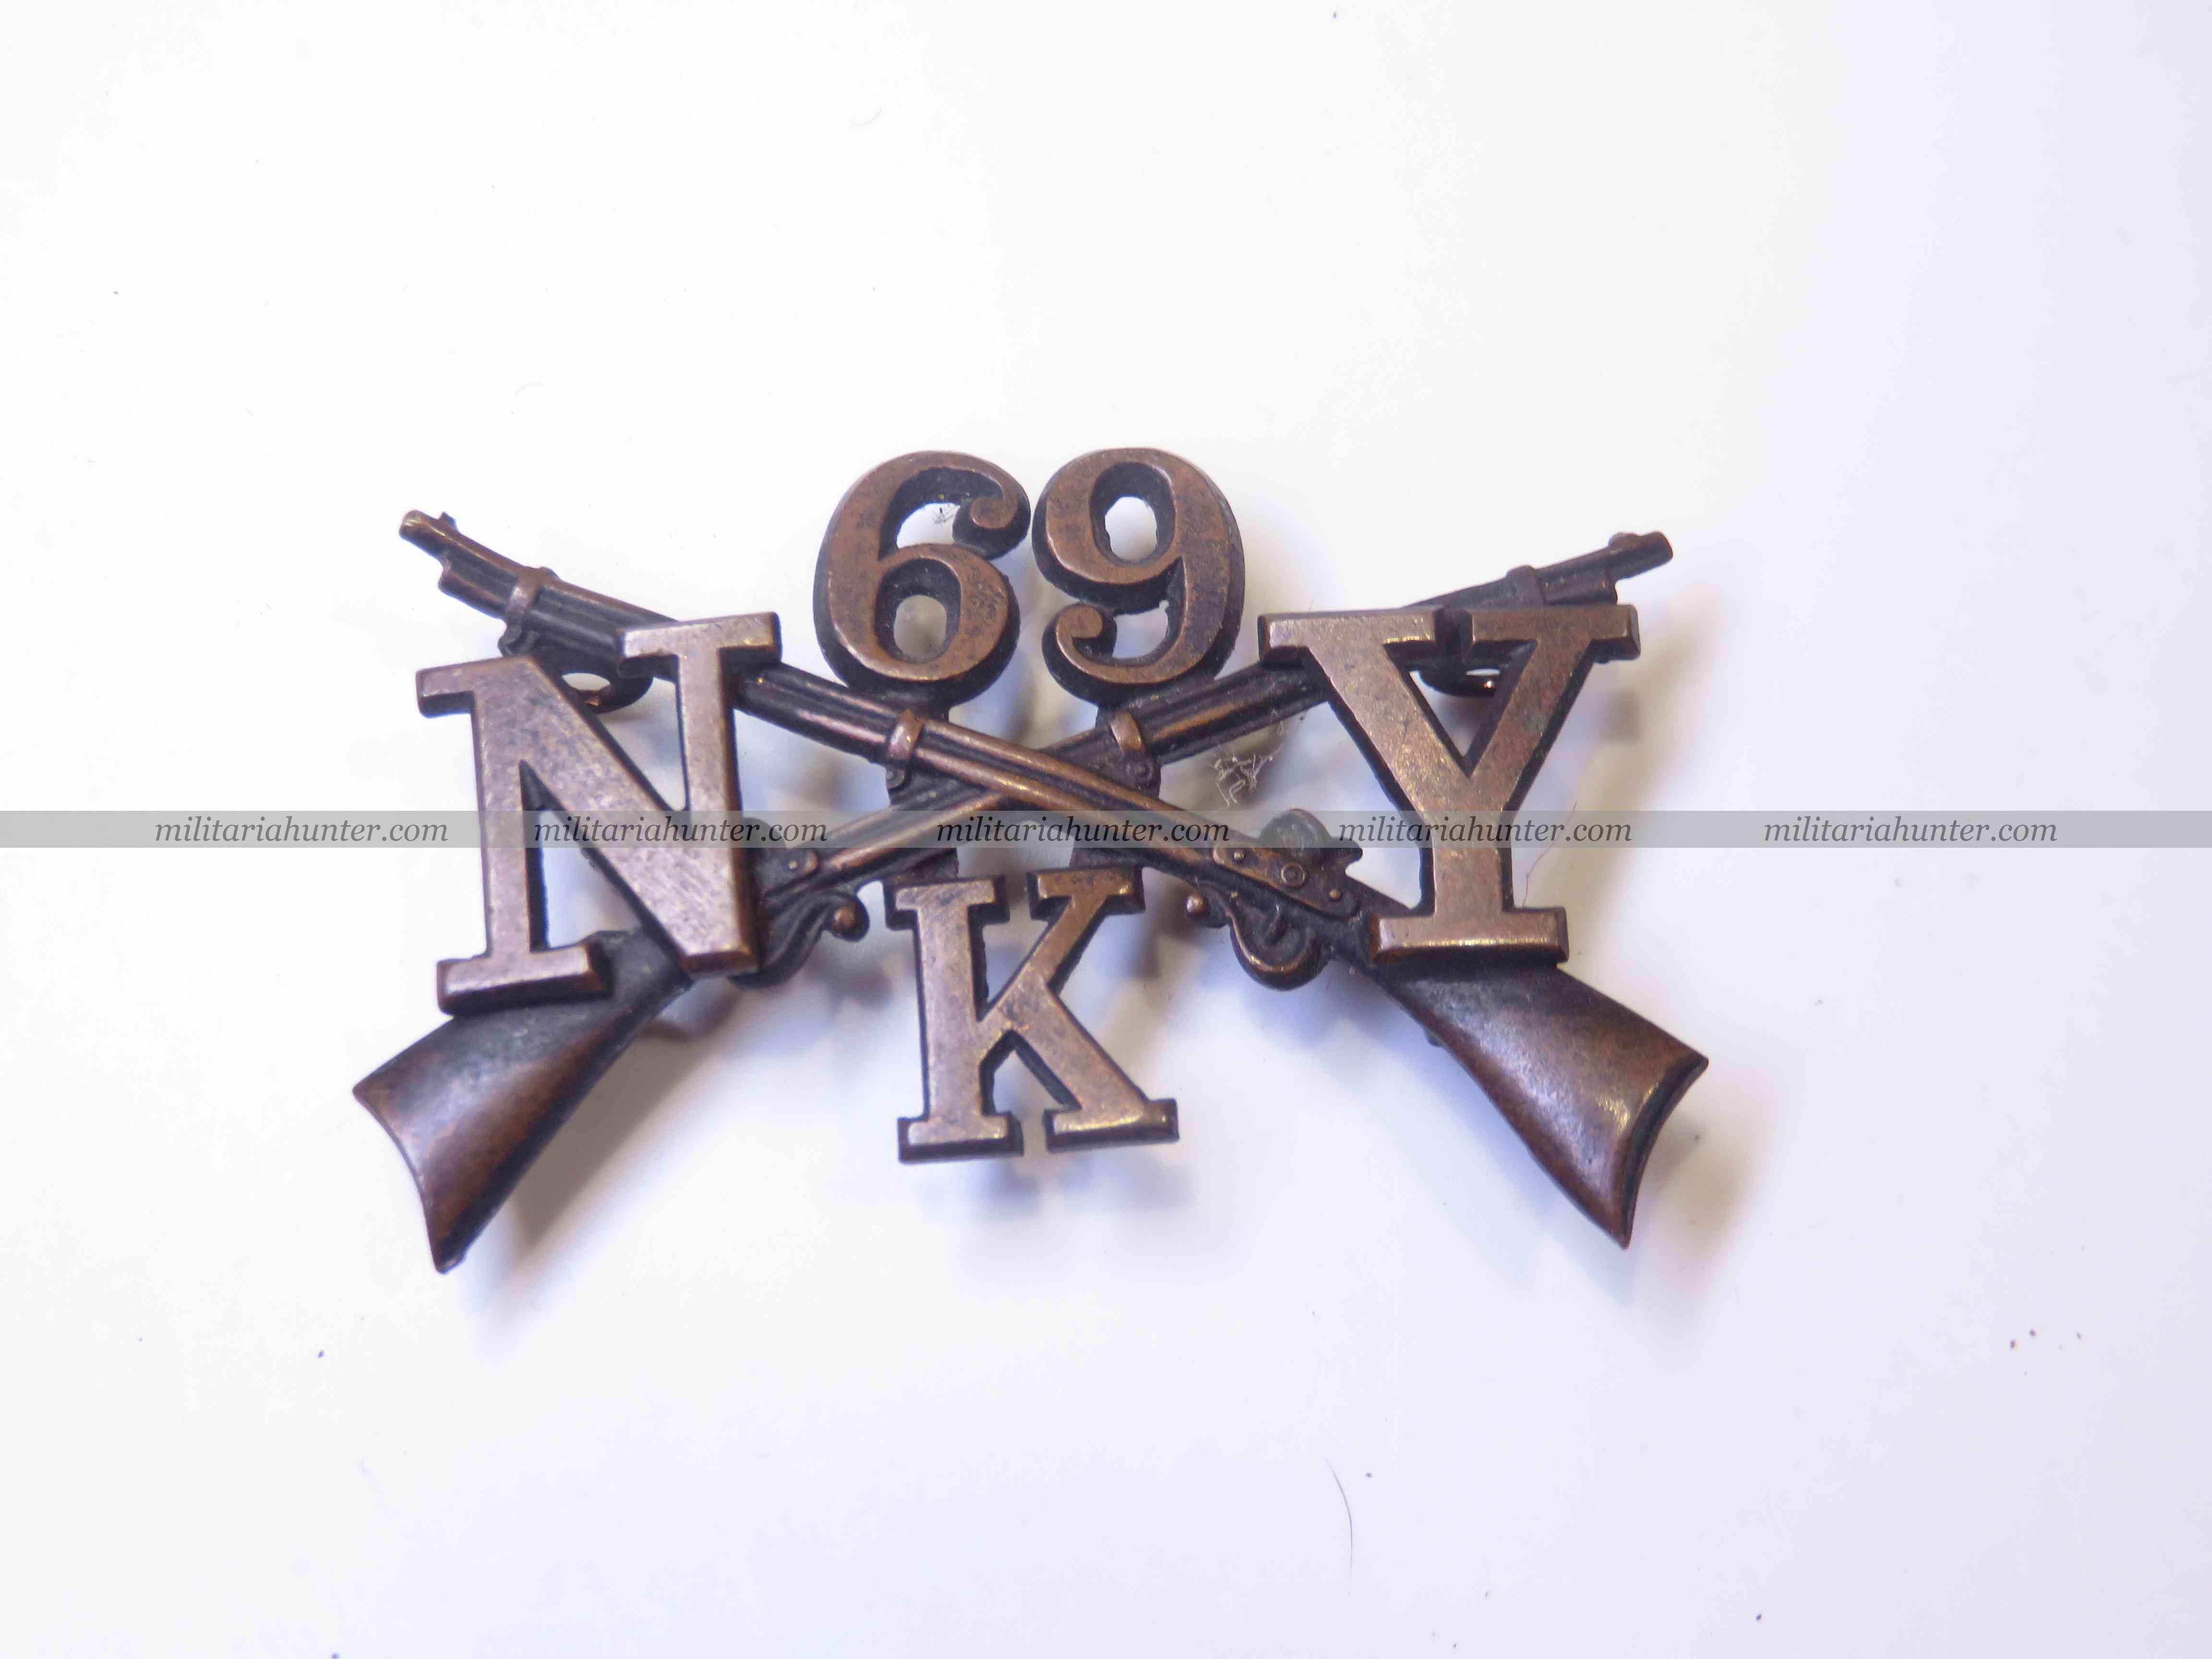 militaria : US ww1 officer collar insignia 69th infantry regiment New York